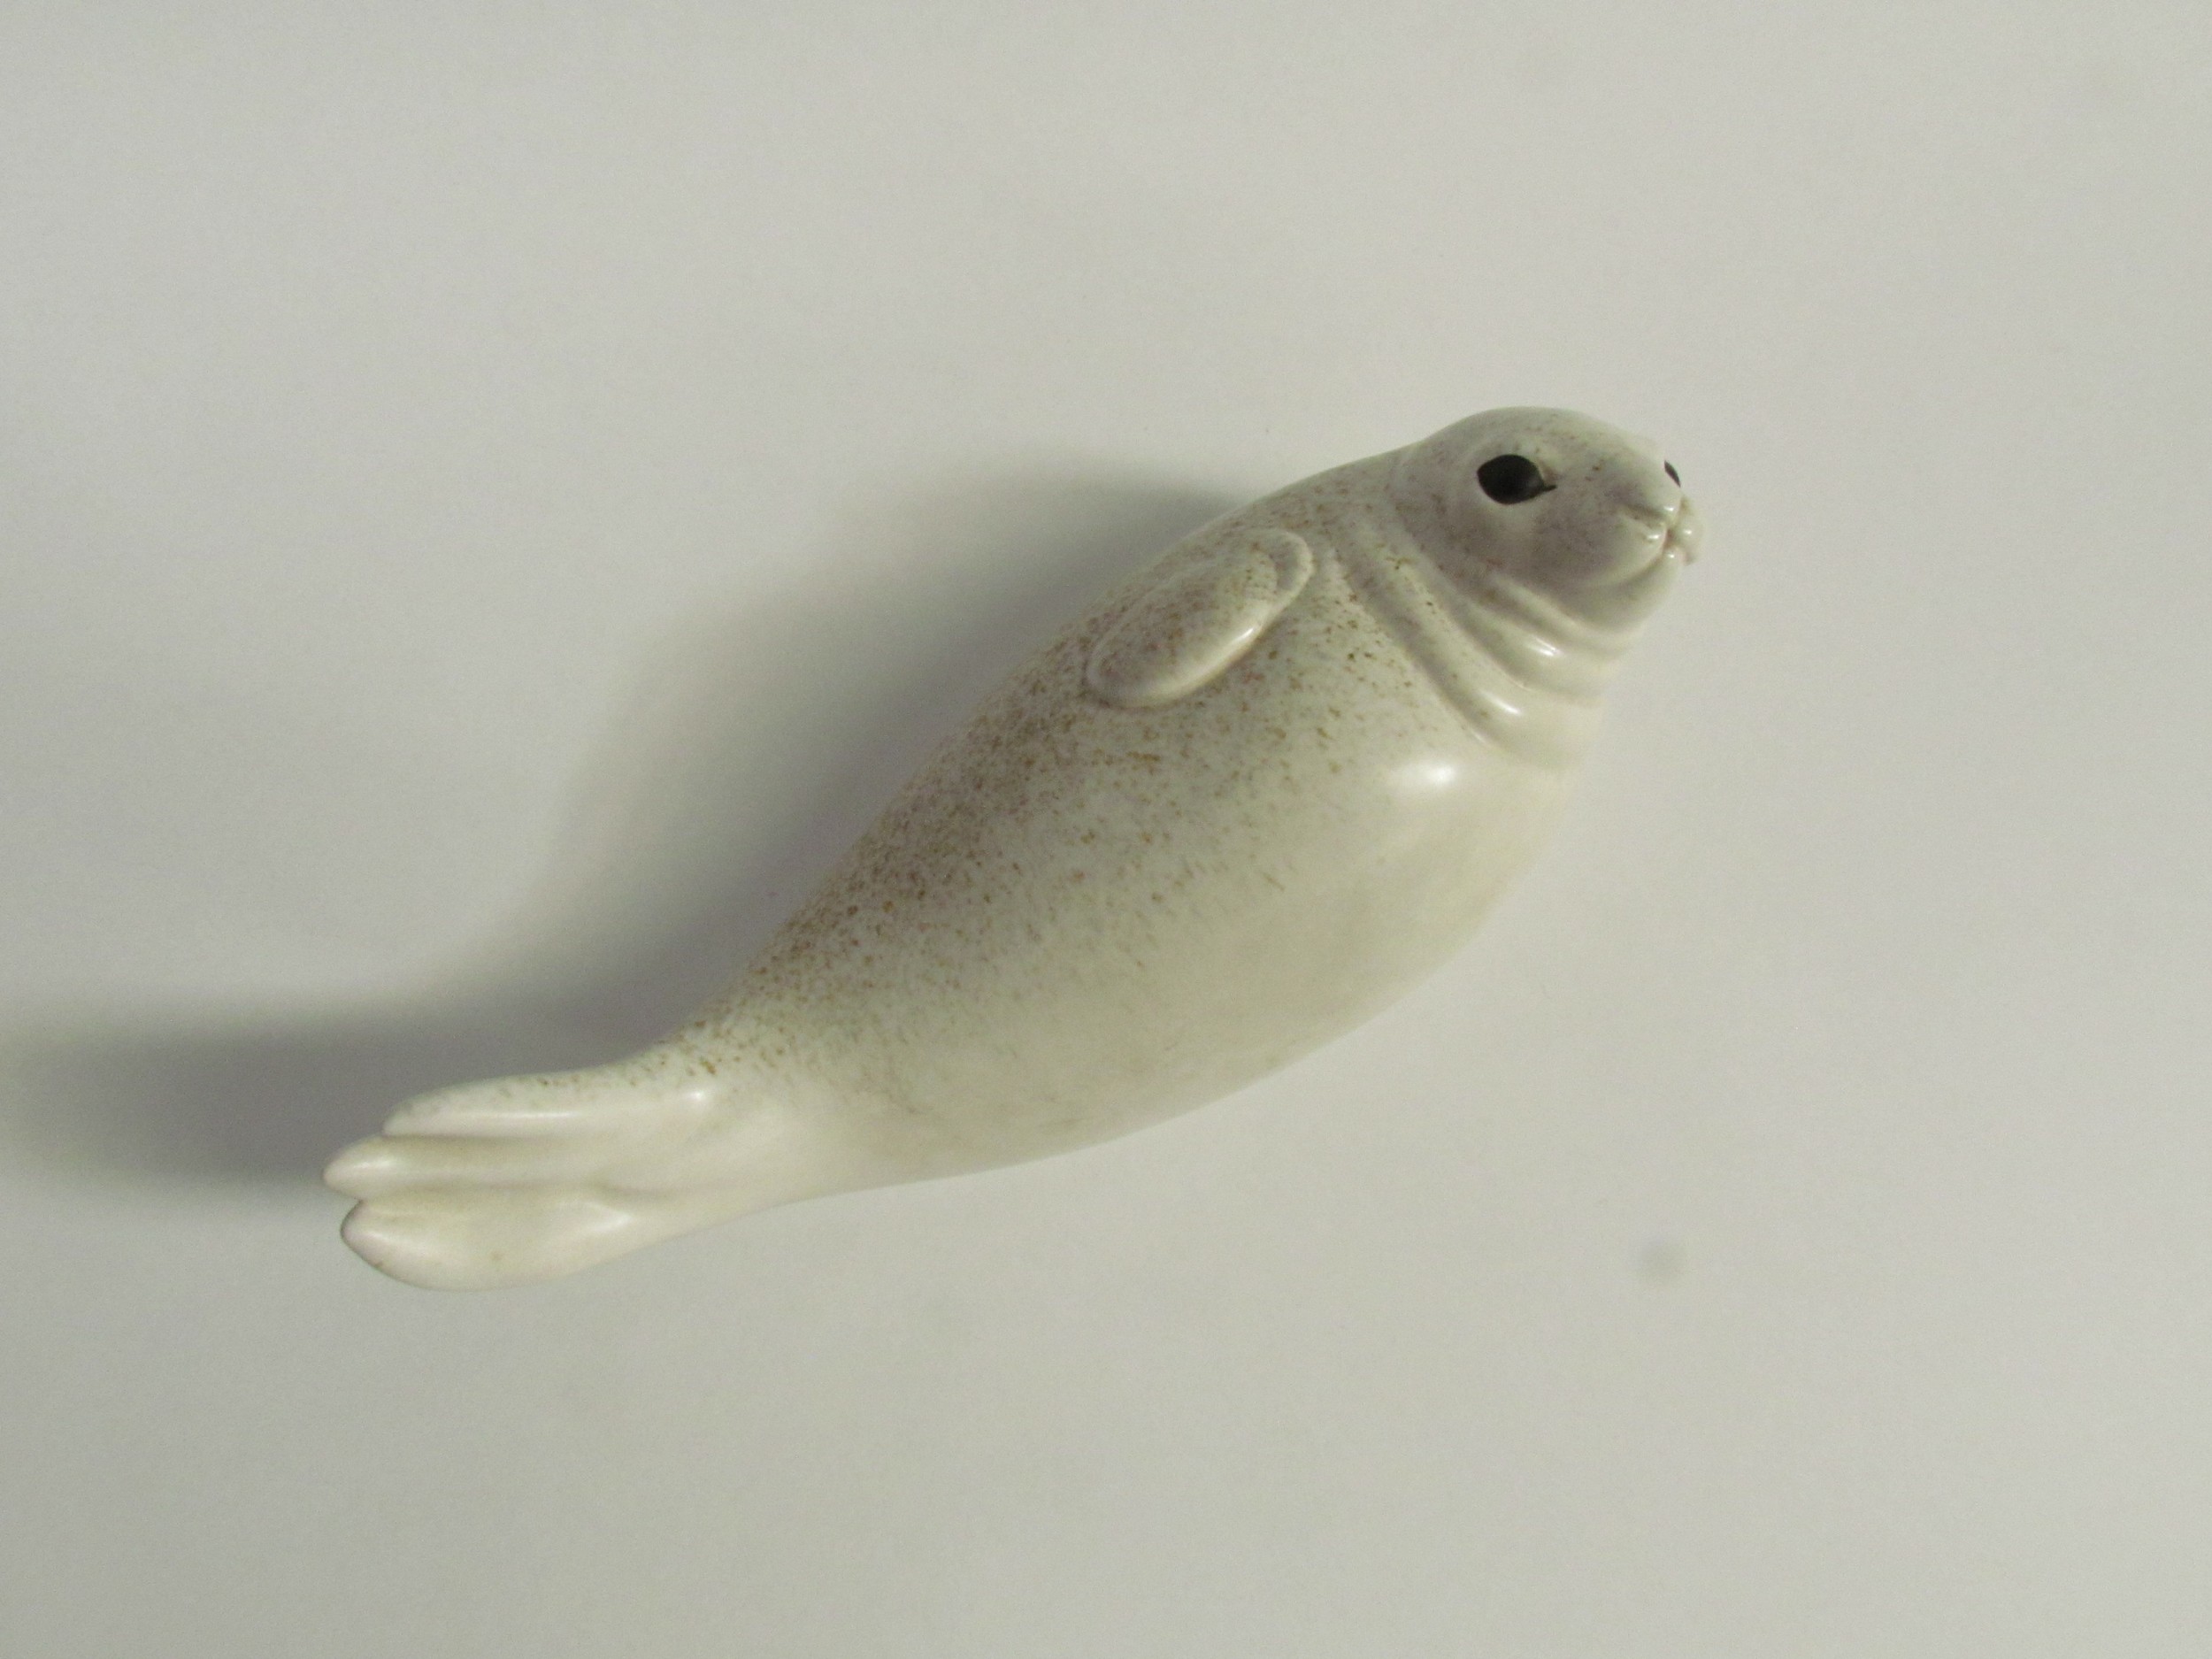 Paul Hoff for Gustavsberg - A ceramic figure of a Seal. Impressed marks to base. 9cm high x 24cm